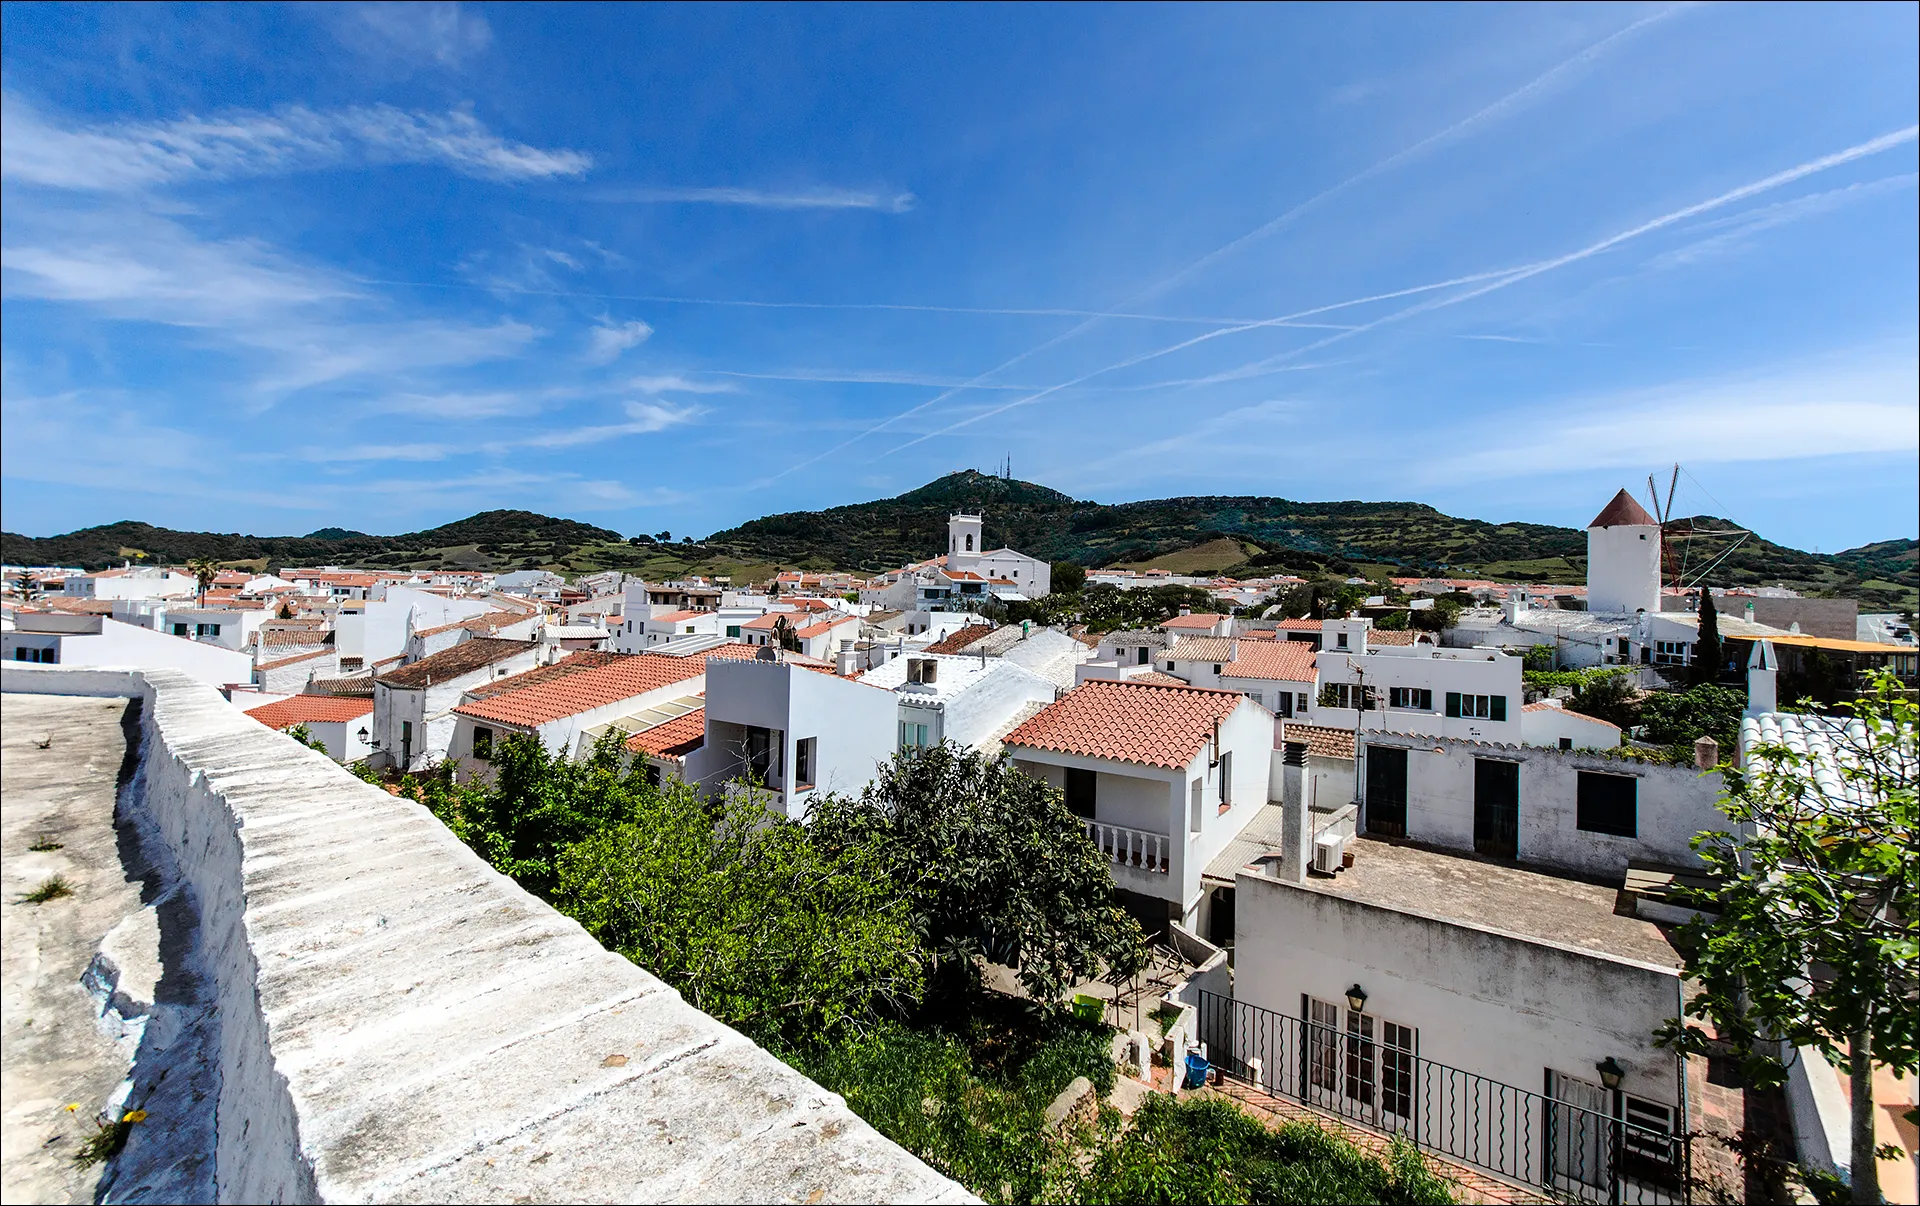 Photo showing: See the description of Es Mercadal—Aljub 001.jpg (File:Es_Mercadal—Aljub_001.jpg).
This is another view from the roof.